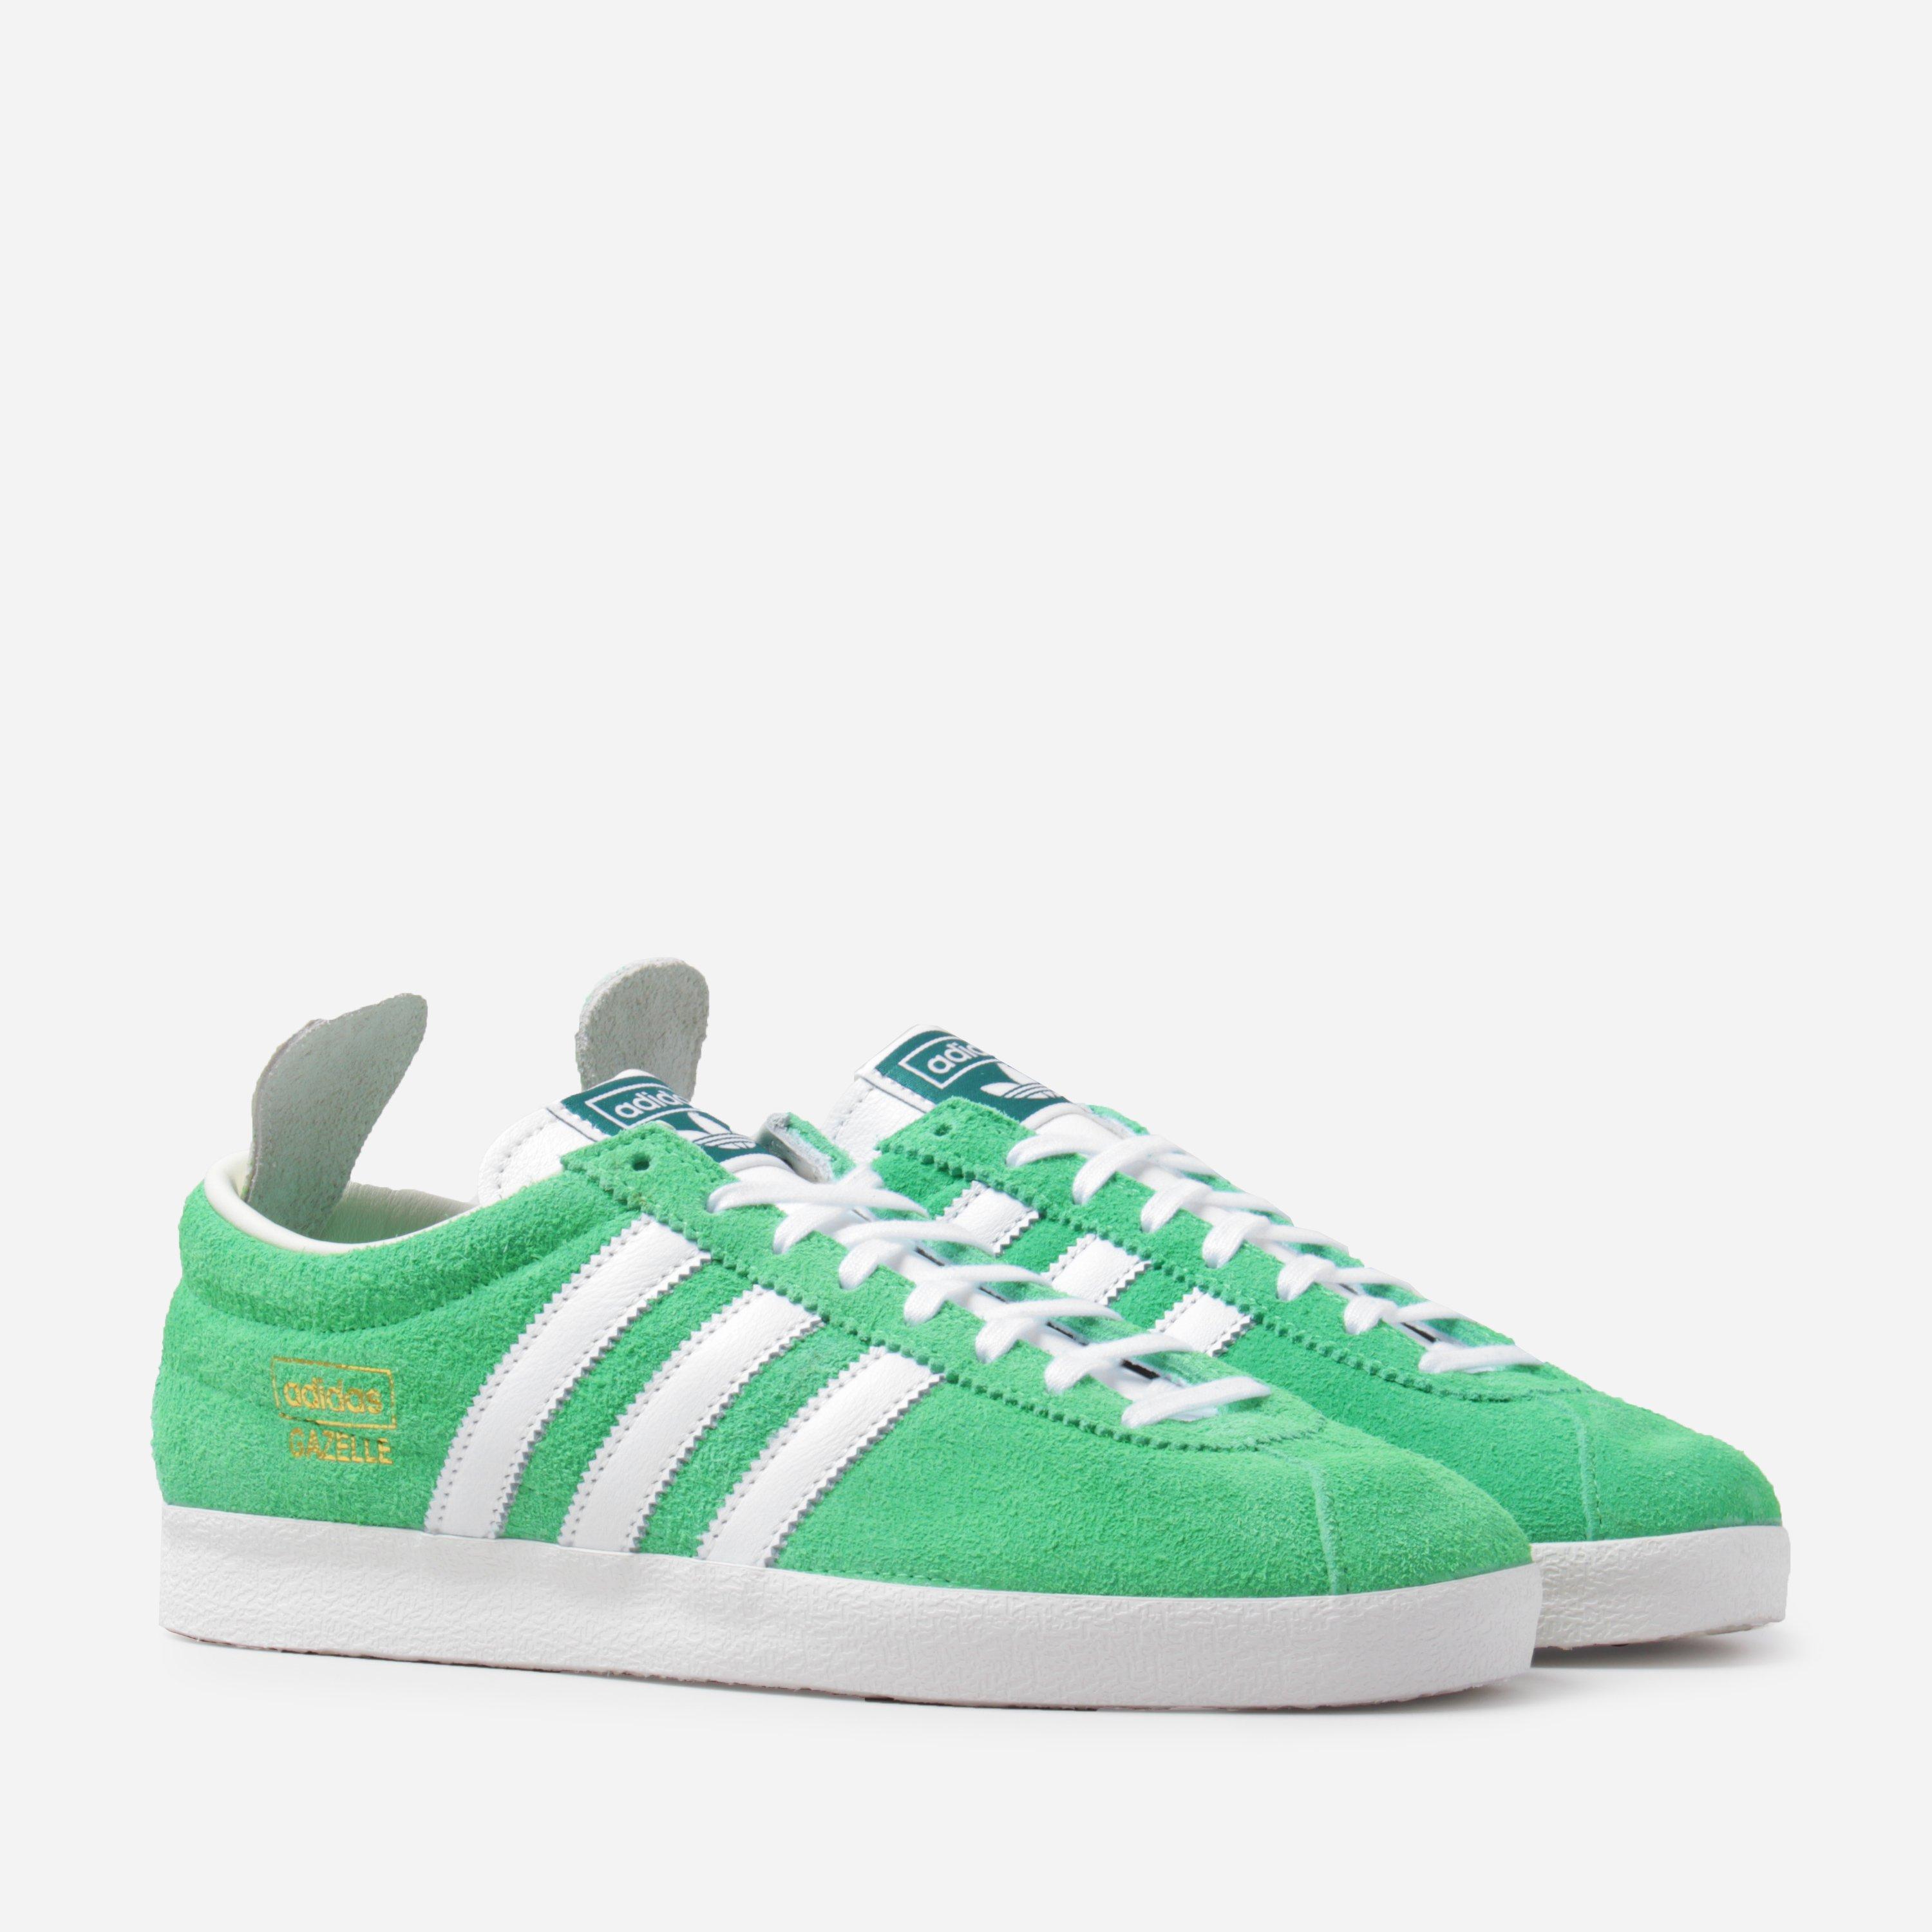 adidas Originals Lace Gazelle Vintage Trainers in Green/White (Green) for  Men - Lyst